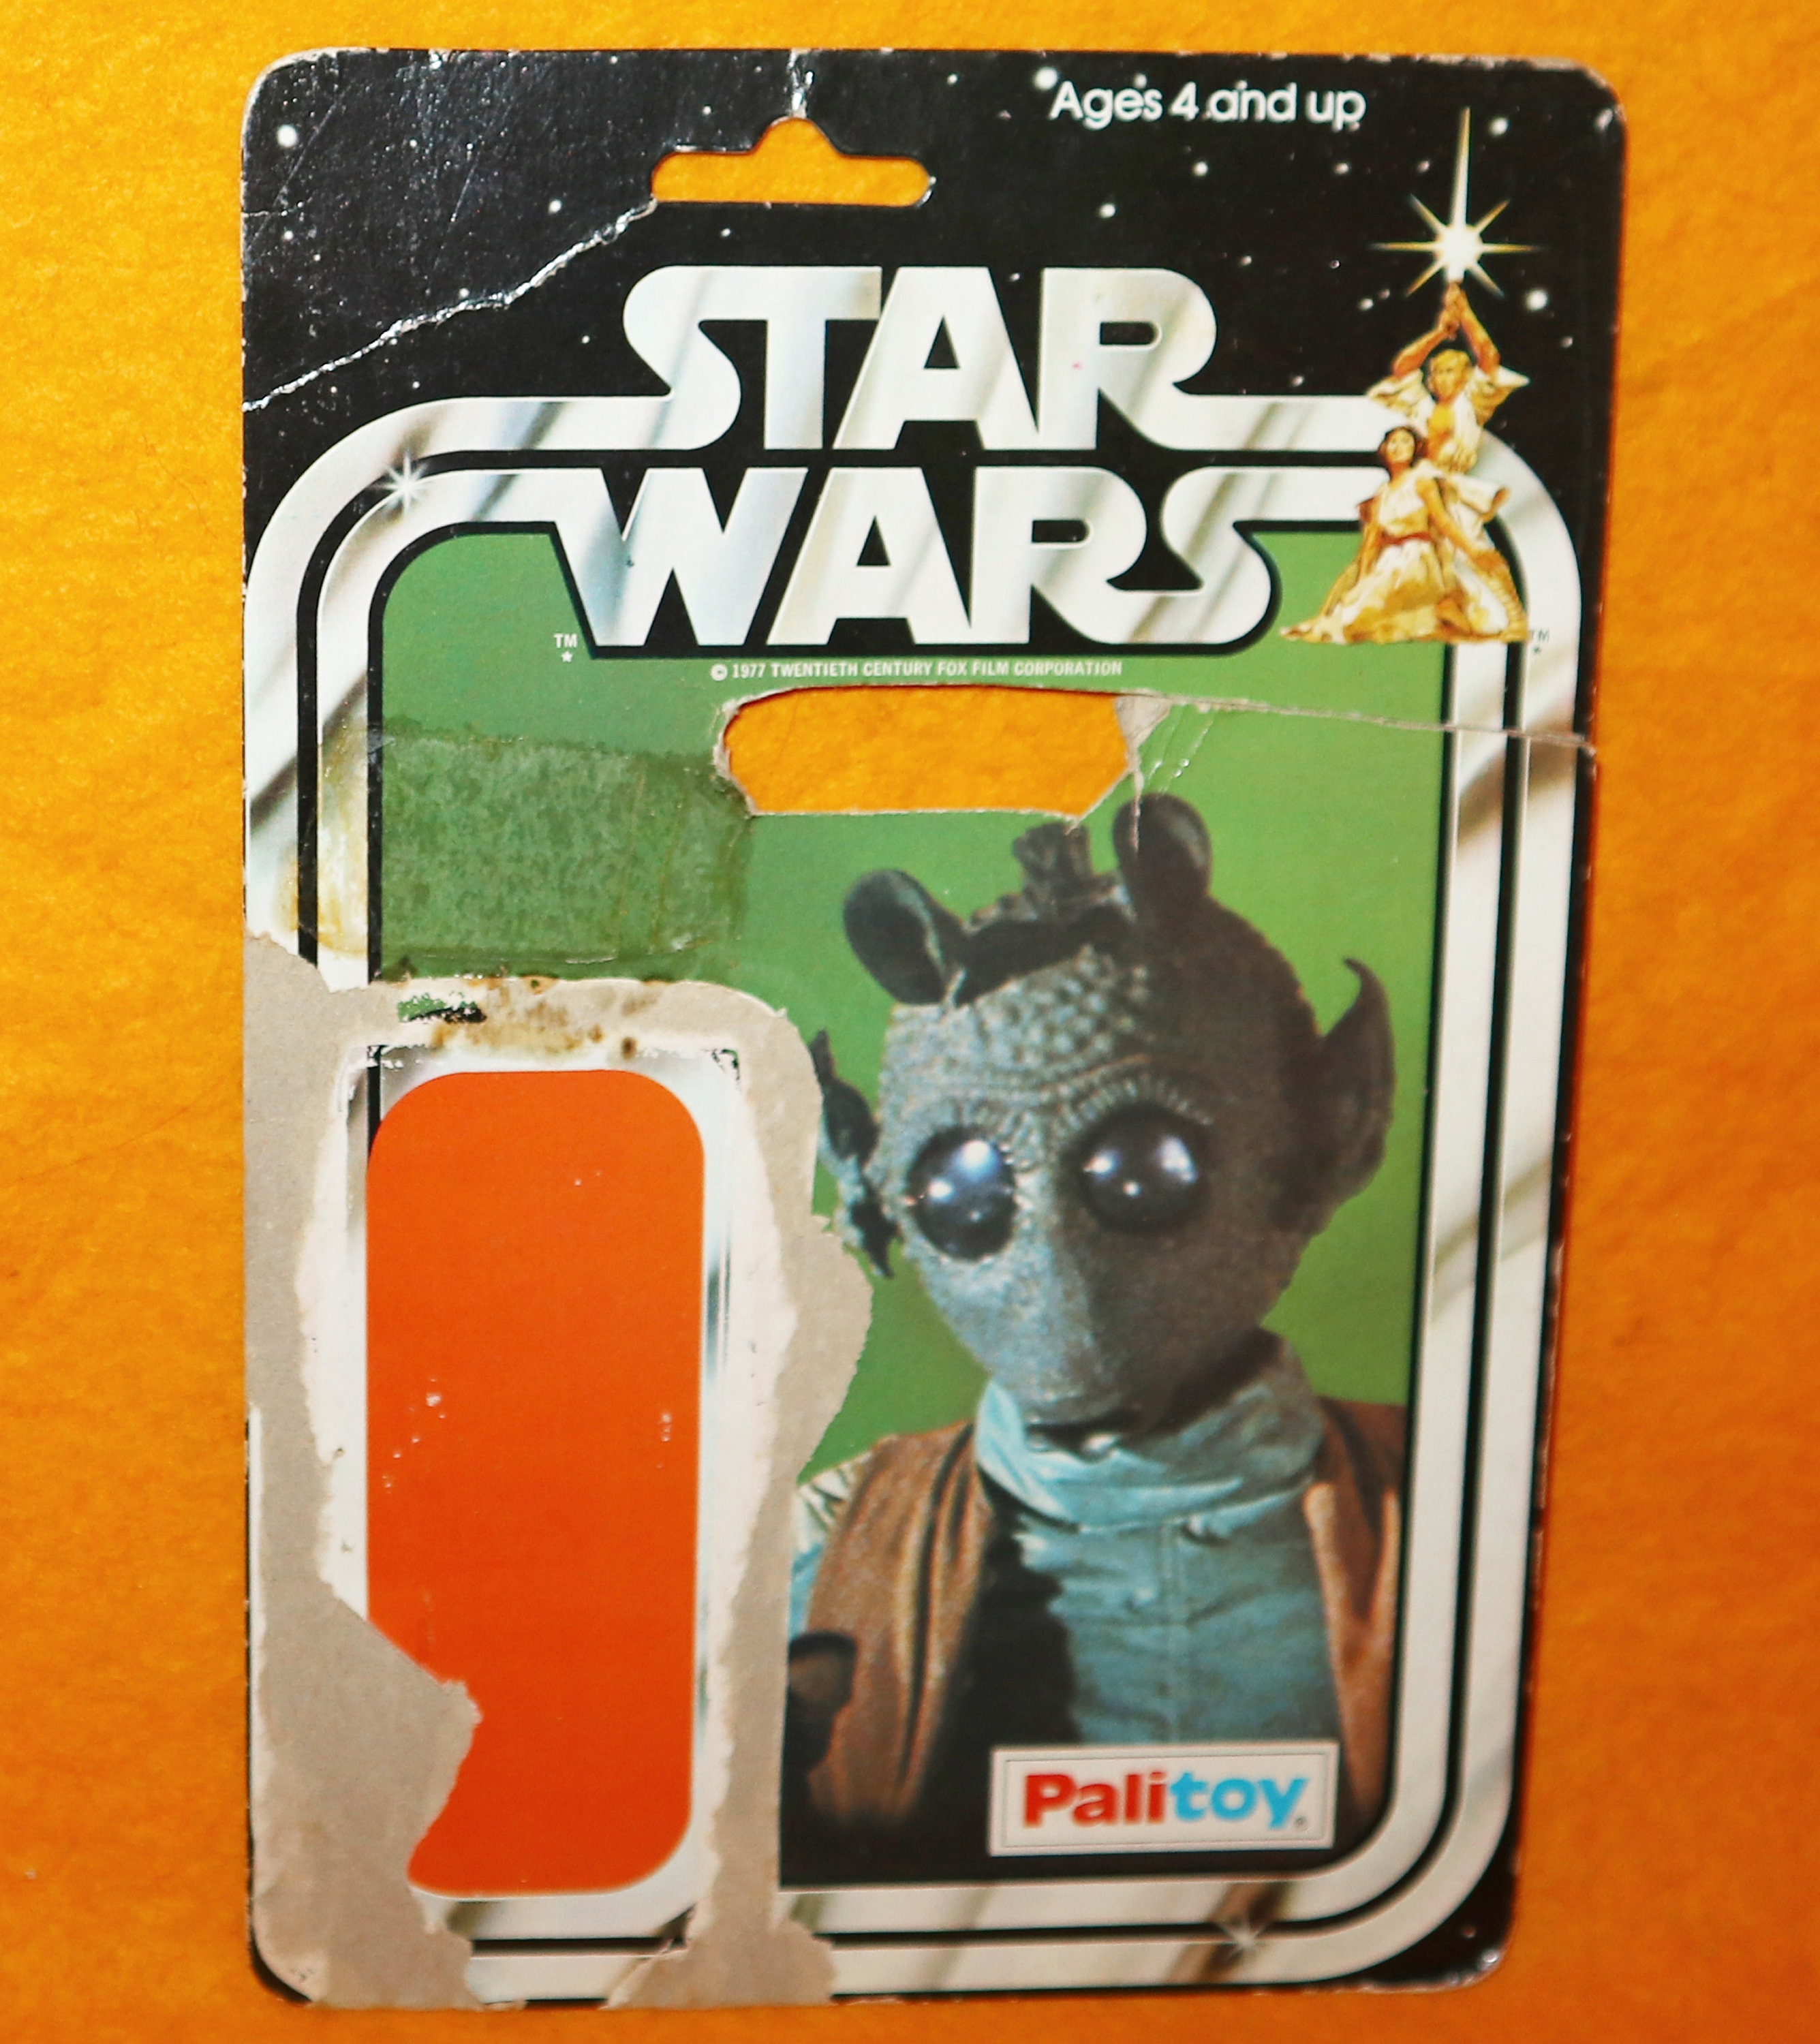 Sealed Kenner and Palitoy Star Wars figures and vintage toys in